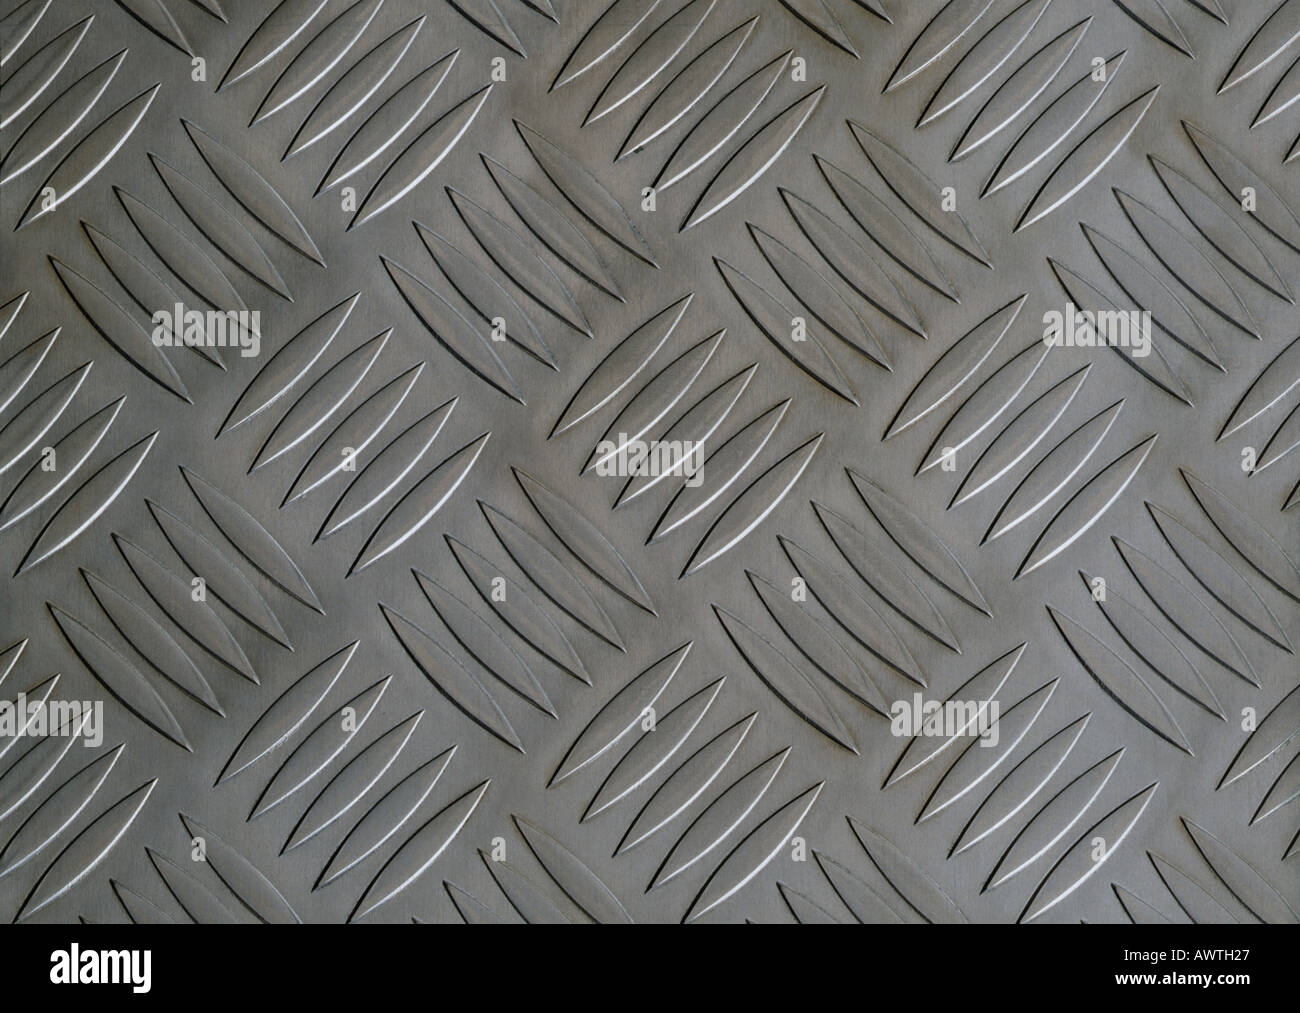 Repetitive pattern on metal plate, close-up, full frame Stock Photo